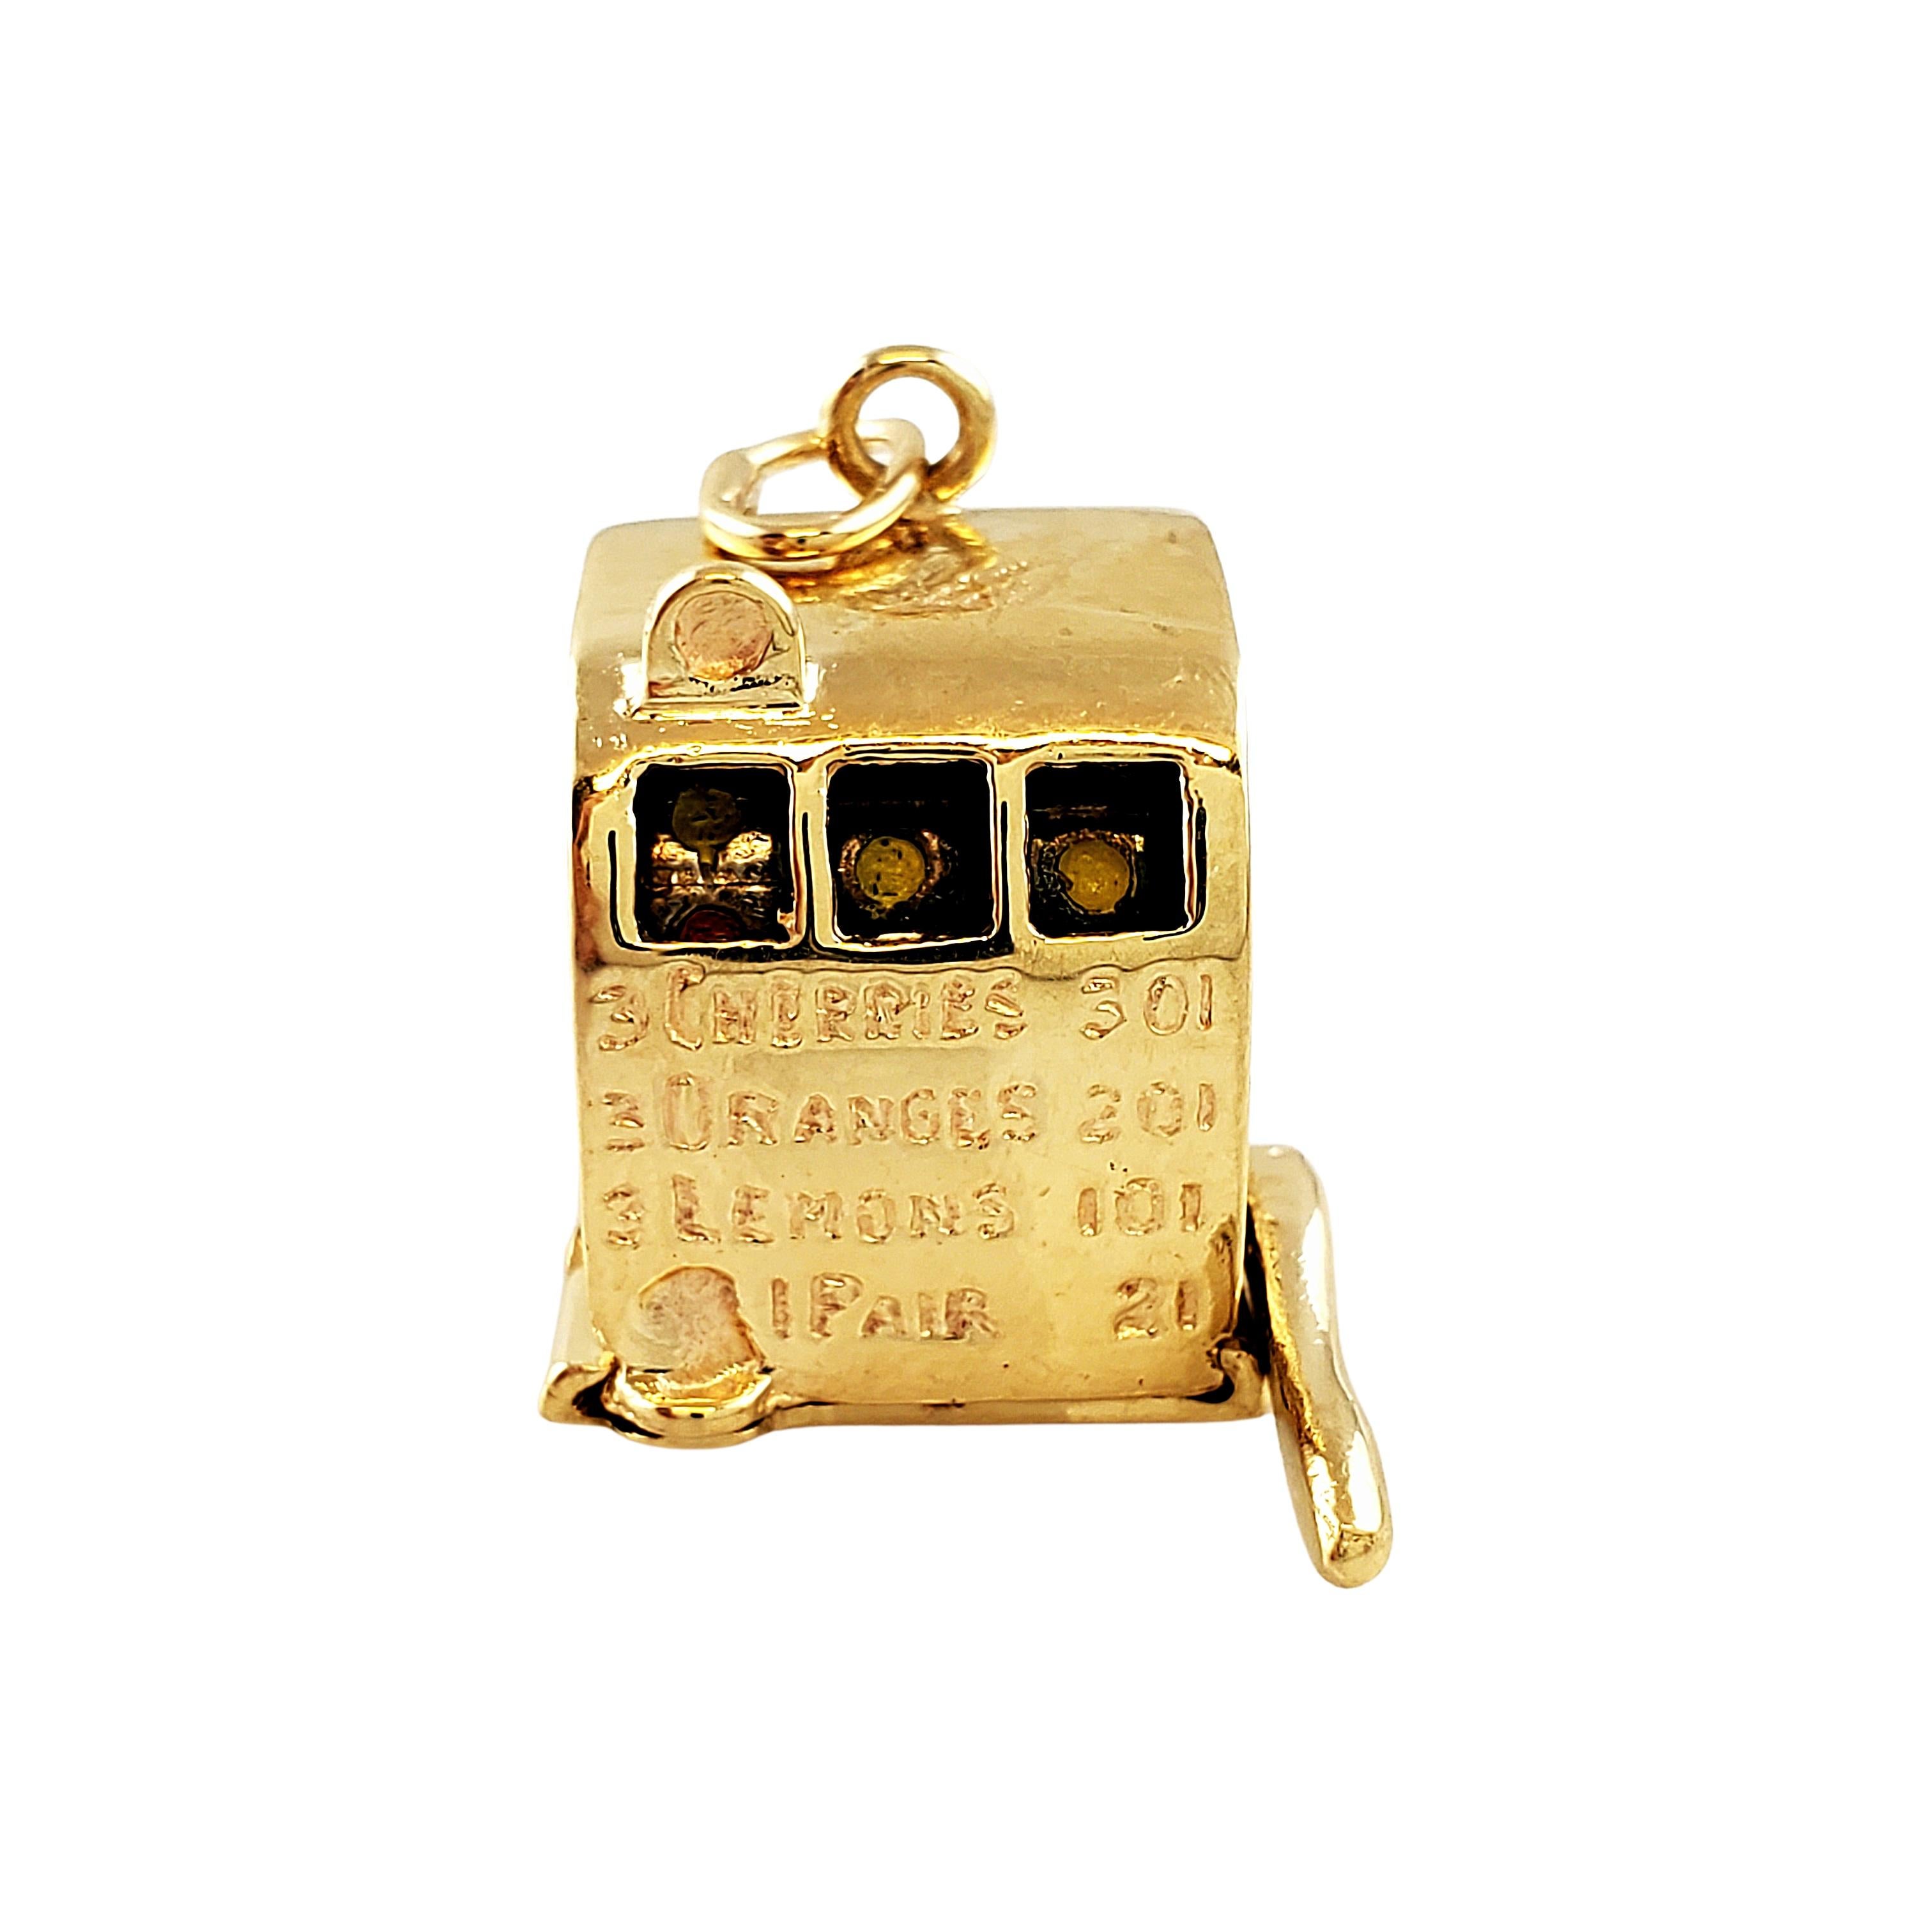 14K Yellow Gold Slot Machines Charm

Come take a gamble on this lucky slot machine charm!

Beautiful 3D 14K yellow gold slot machine charm, with mechanical lever and moving slot pictures. Pictures that feature cherries, oranges, and lemons. Enamel